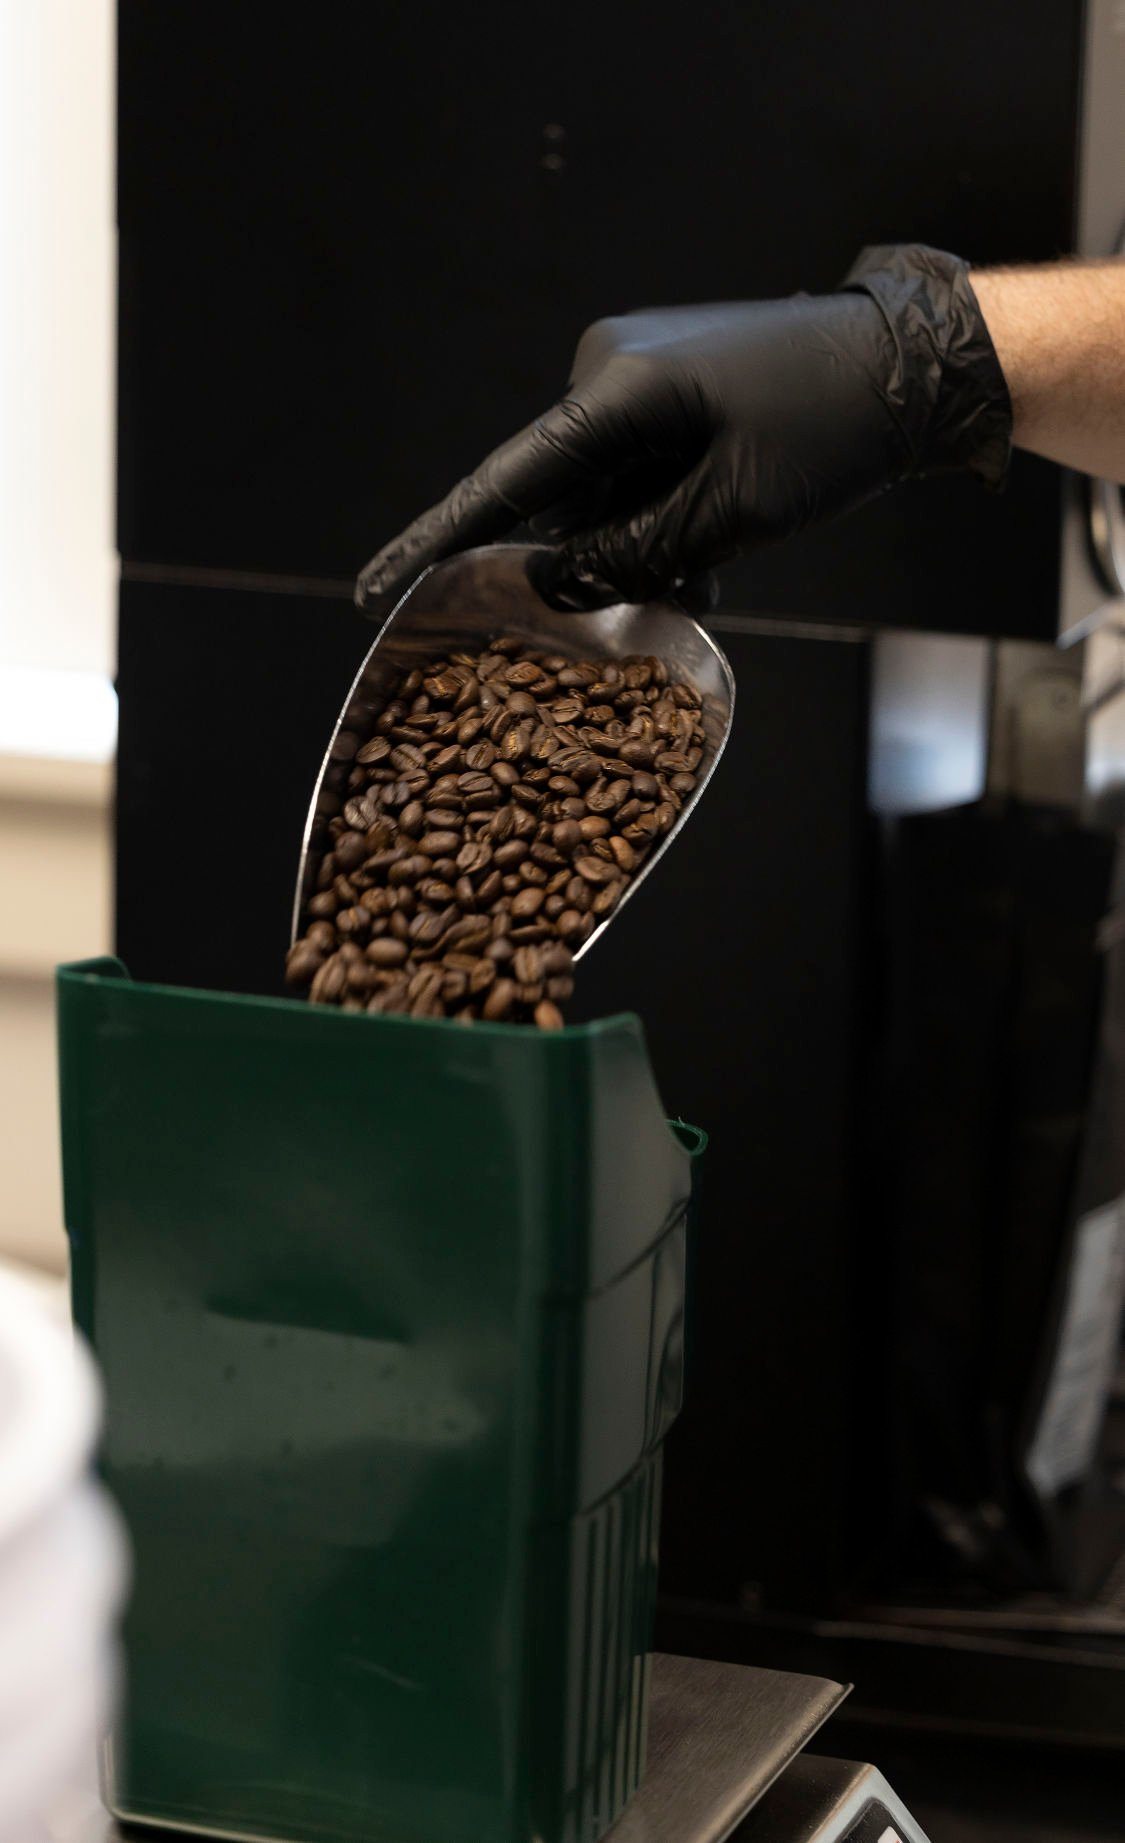 Owner Christian McLaughlin weighs beans prior to grinding at Spelunker Coffee Co. in Maquoketa, Iowa.    PHOTO CREDIT: Stephen Gassman